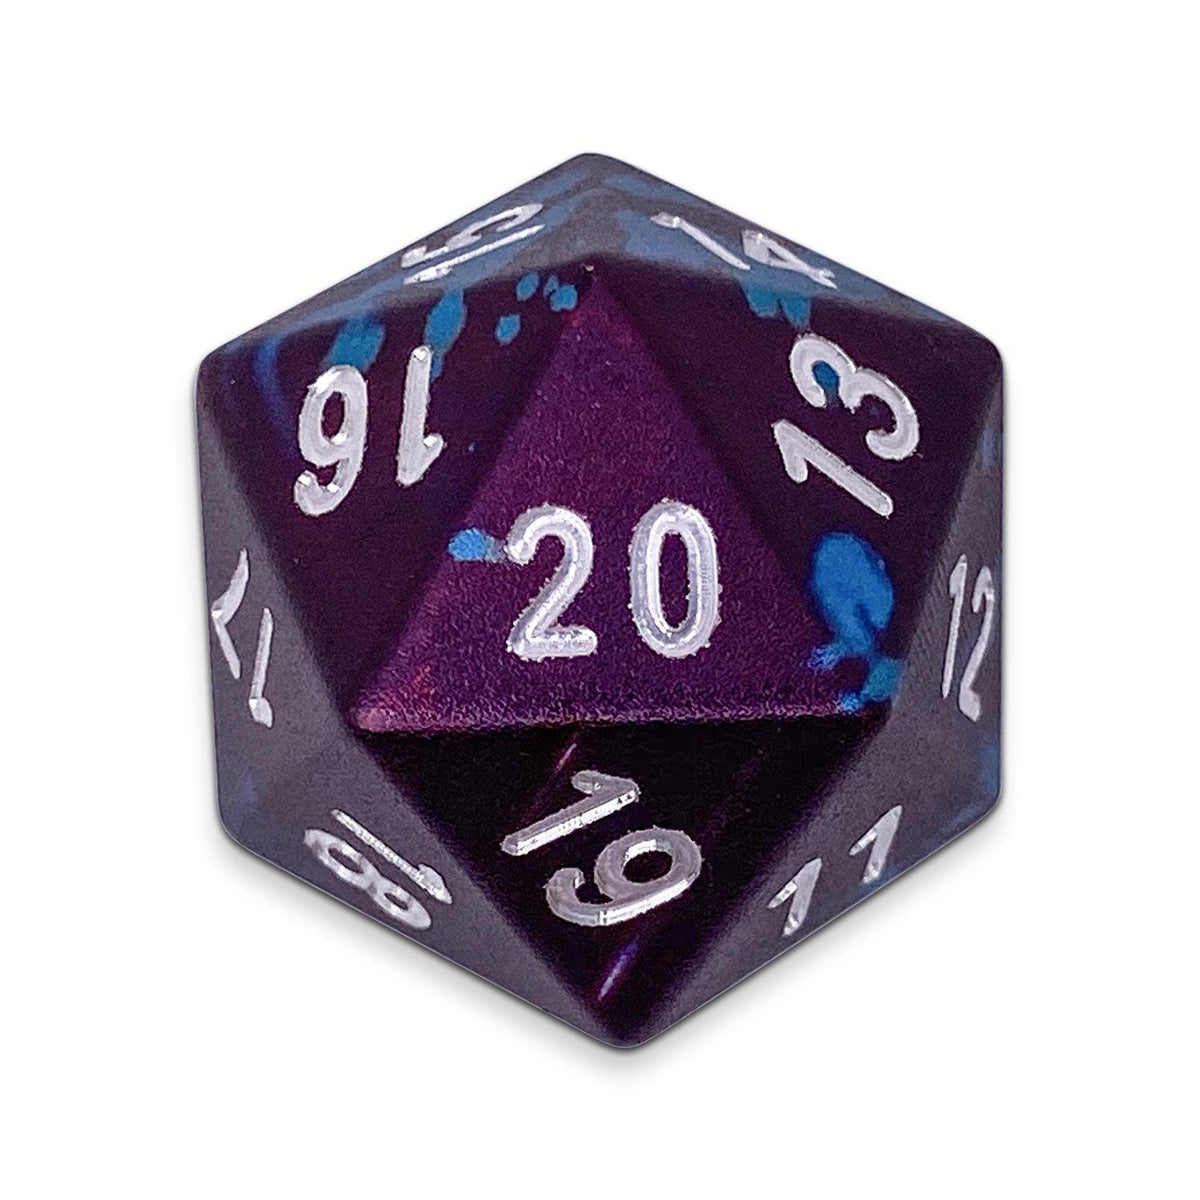 Single Wondrous Dice® Countdown D20 in Faerie Dragon by Norse Foundry 6063 Aircraft Grade Aluminum - NOR 02445